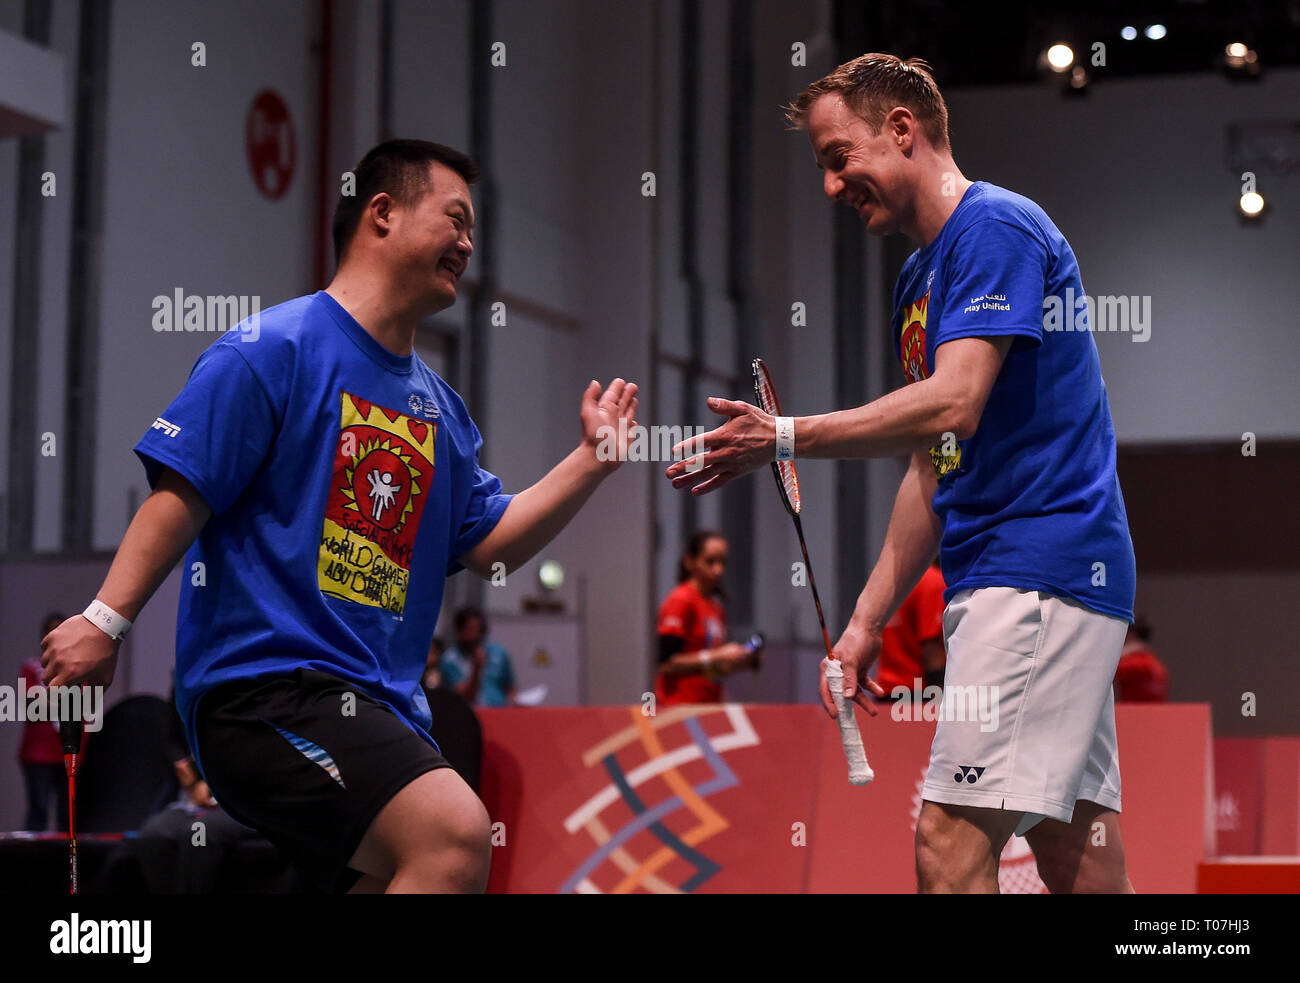 Abu Dhabi, United Arab Emirates. 18th Mar, 2019. Peter Gade of Denmark (R)  encourages Chai Xinyu from Chinese Special Olympics delegation during the  unified badminton experience event at the 2019 Abu Dhabi